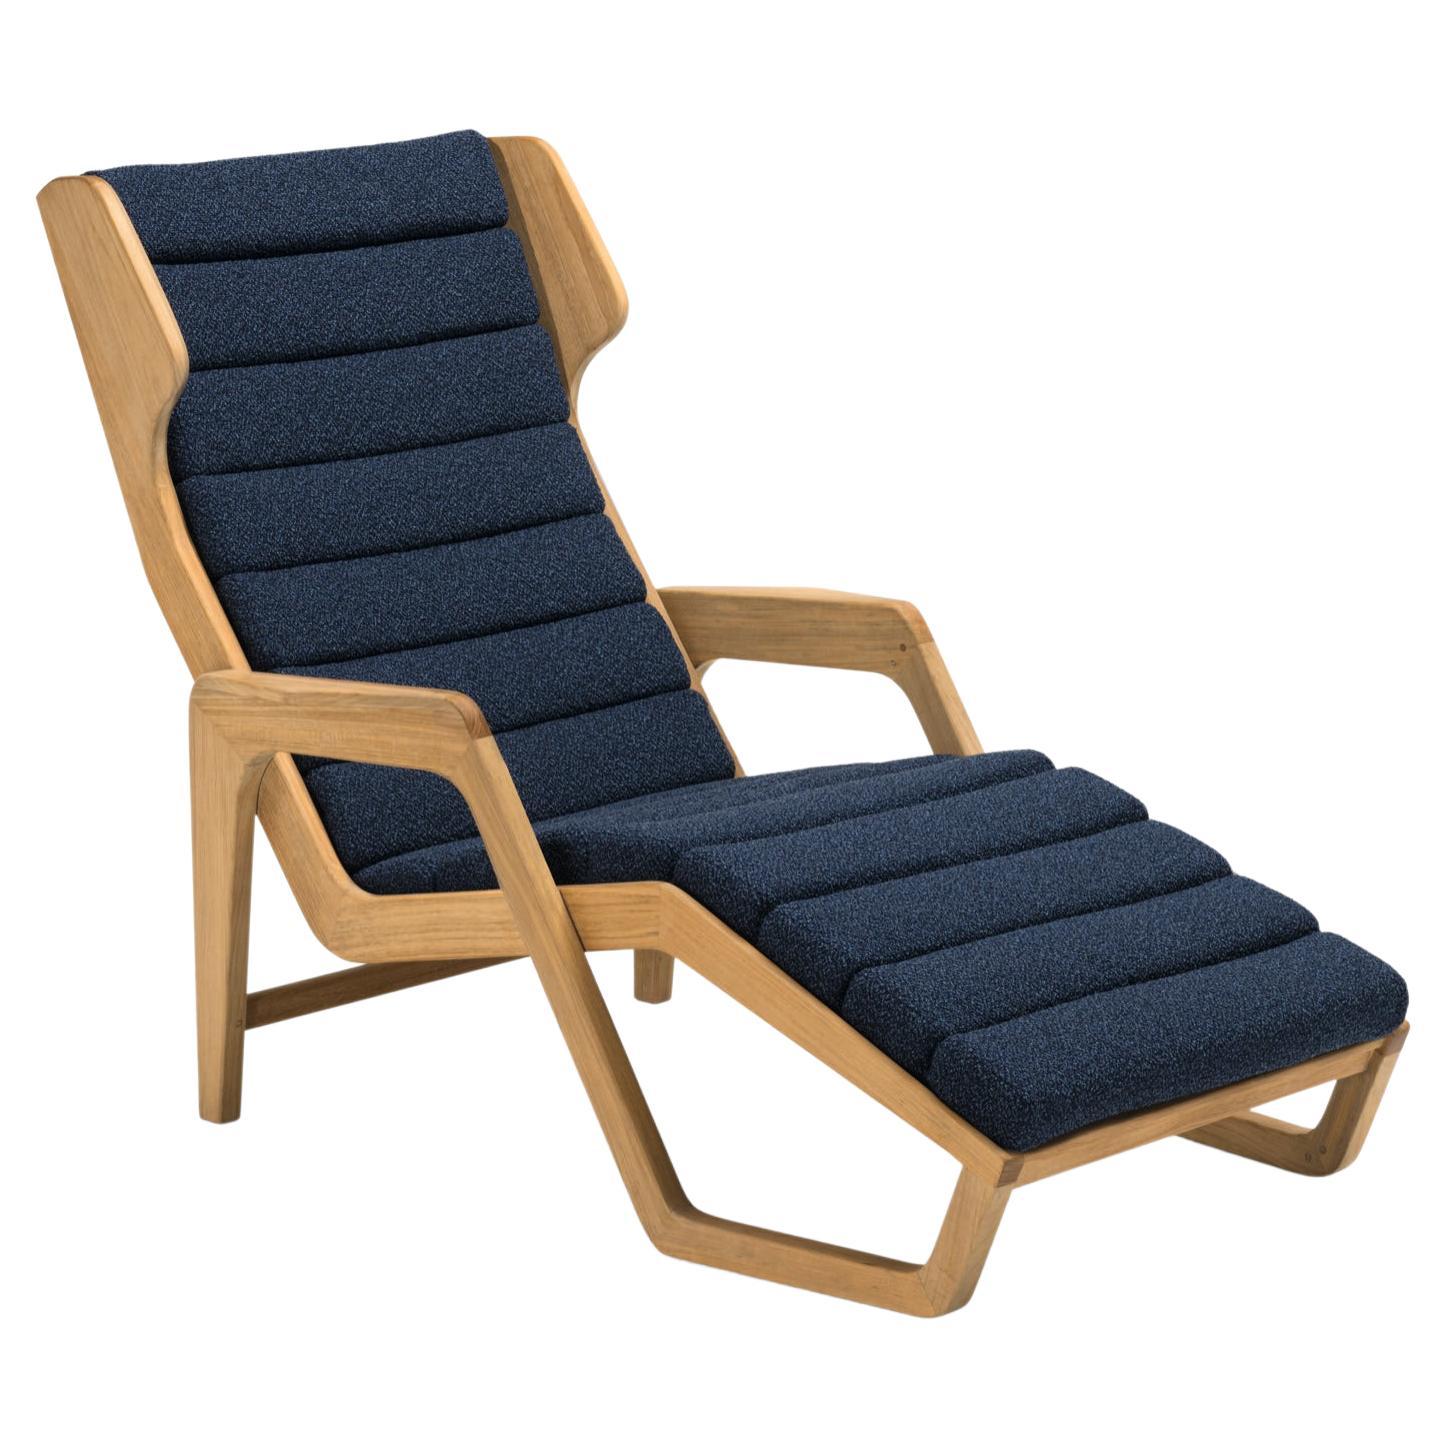 https://a.1stdibscdn.com/outdoor-solid-wood-armchair-moltenic-by-gio-ponti-design-d1505-for-sale/f_51742/f_360353021693993416867/f_36035302_1693993417344_bg_processed.jpg